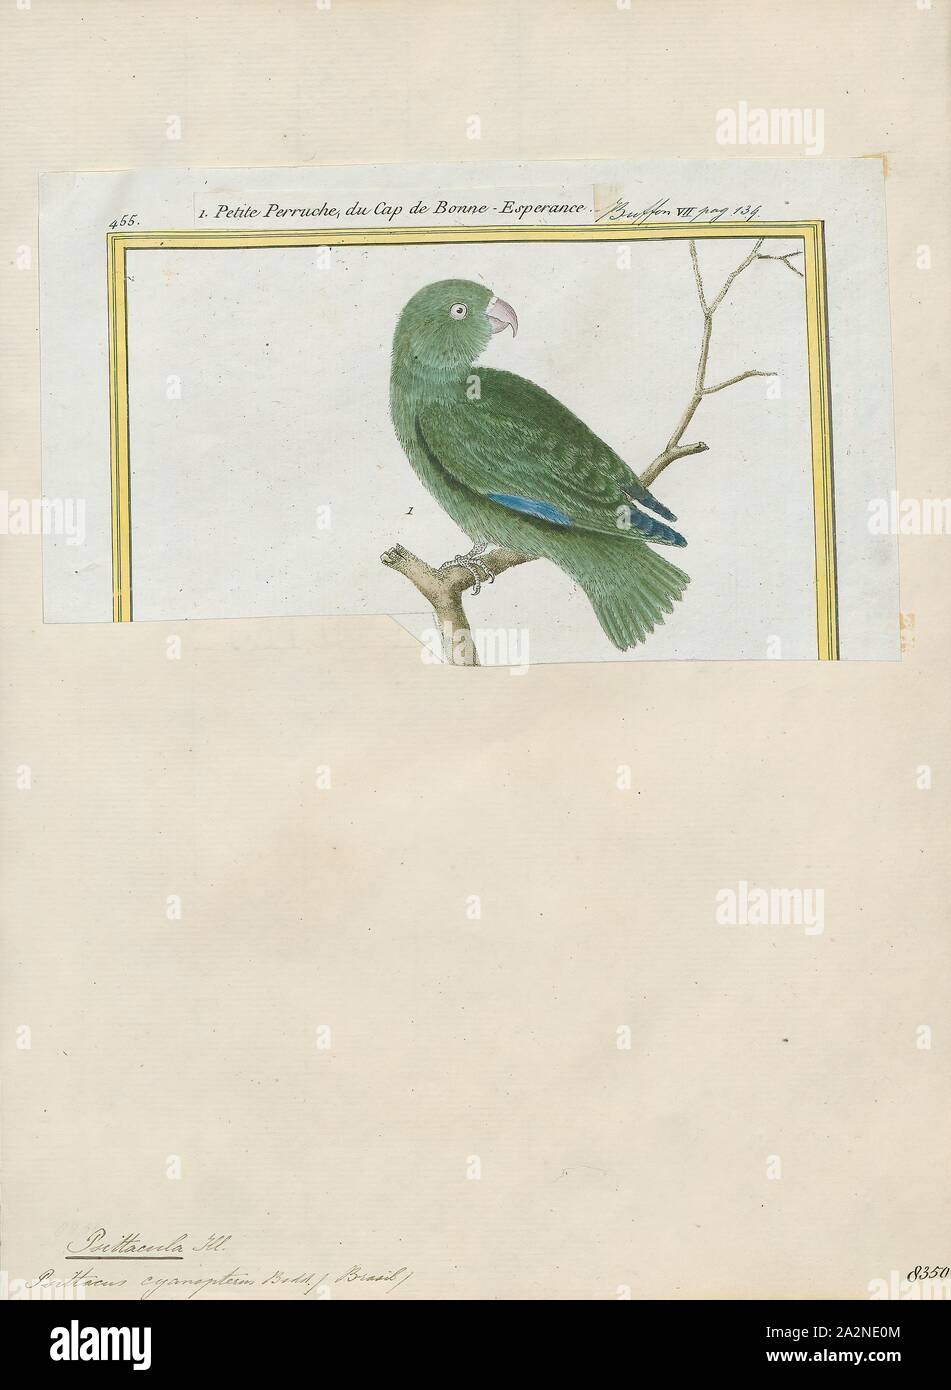 Psittacula cyanoptera, Print, Members of the parrot genus Psittacula or Afro-Asian ring-necked parakeets as they are commonly known in aviculture originates found from Africa to South-East Asia. It is a widespread group, with a clear concentration of species in south Asia, but also with representatives in Africa and the islands of the Indian Ocean. This is the only genus of Parrot which has the majority of its species in continental Asia. Of all the extant species only Psittacula calthropae, Psittacula caniceps and Psittacula echo do not have a representative subspecies in any part of mainland Stock Photo